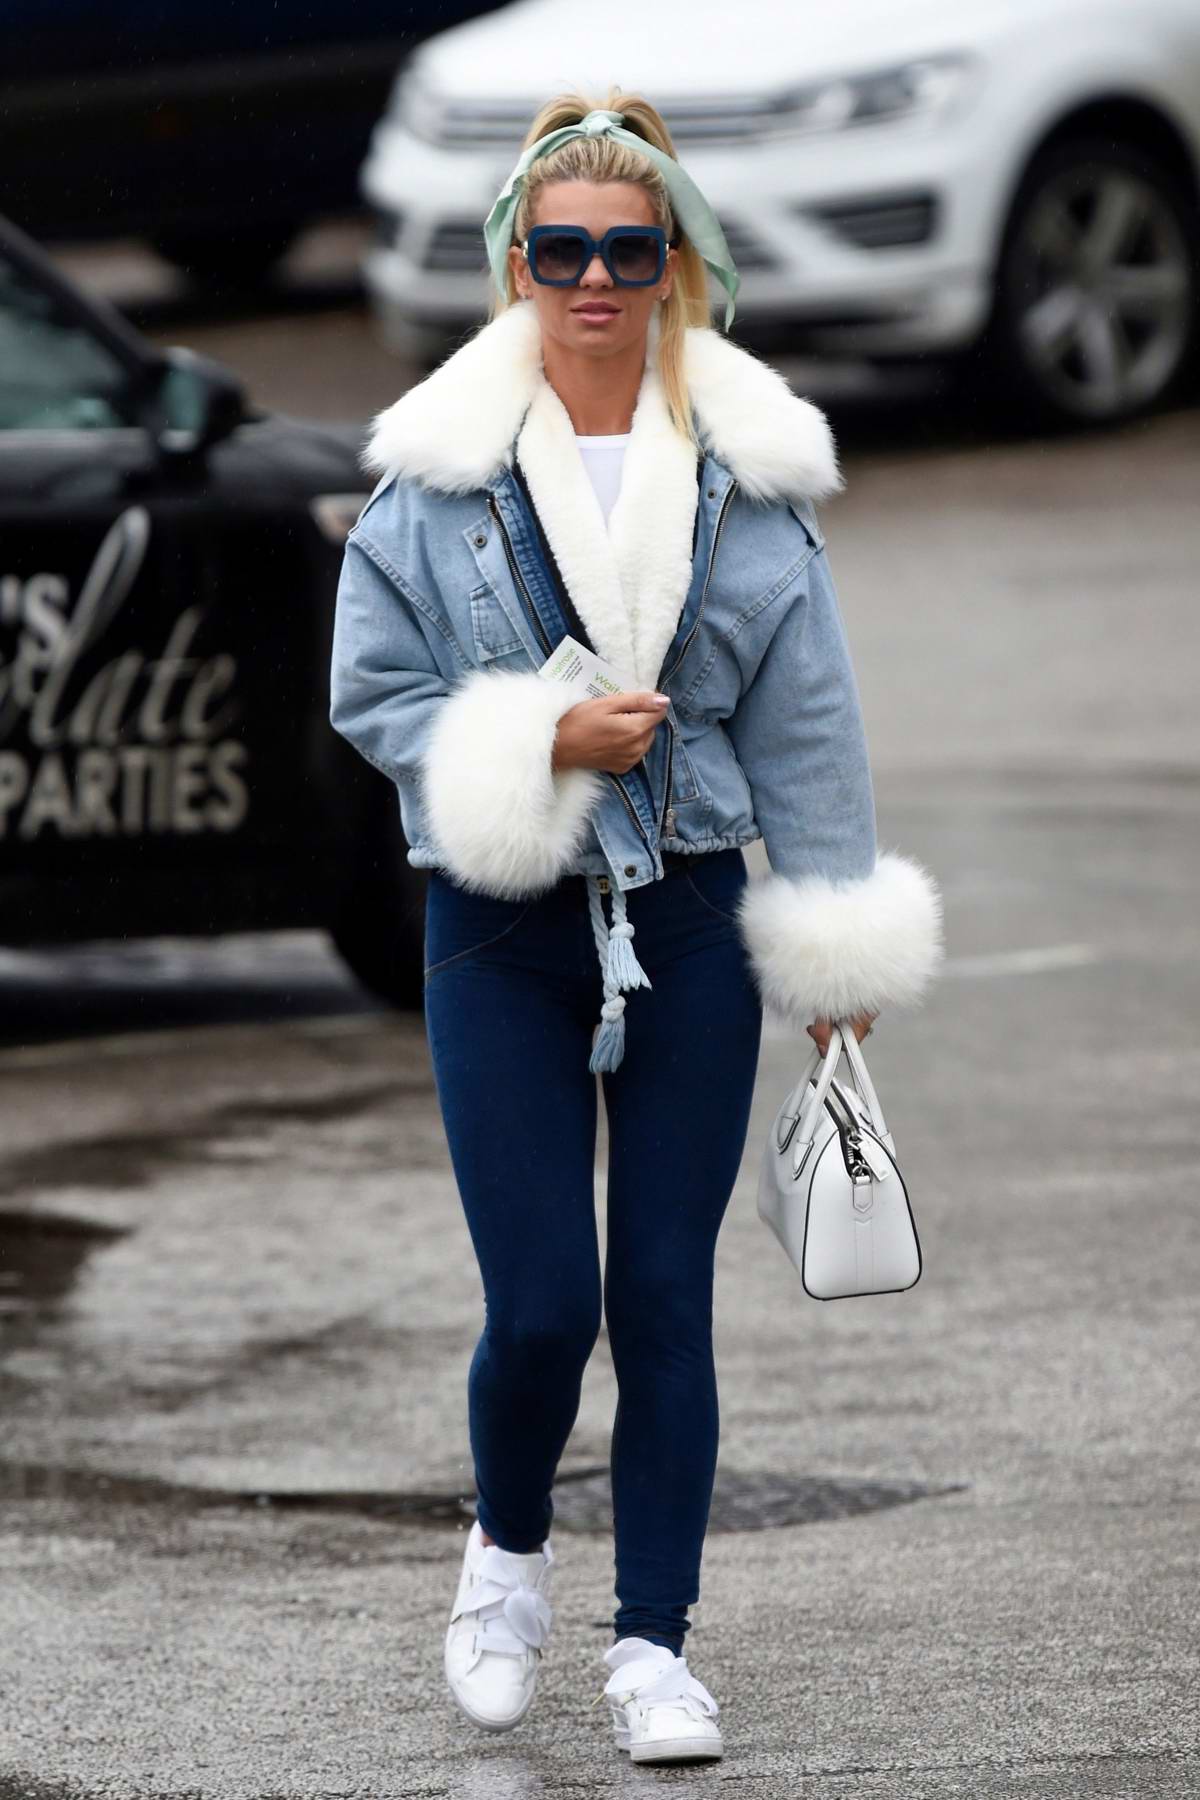 https://www.celebsfirst.com/wp-content/uploads/2019/11/christine-mcguinness-seen-wearing-a-fur-lined-denim-jacket-and-blue-denim-leggings-as-she-steps-out-in-chesire-uk-281119_7.jpg